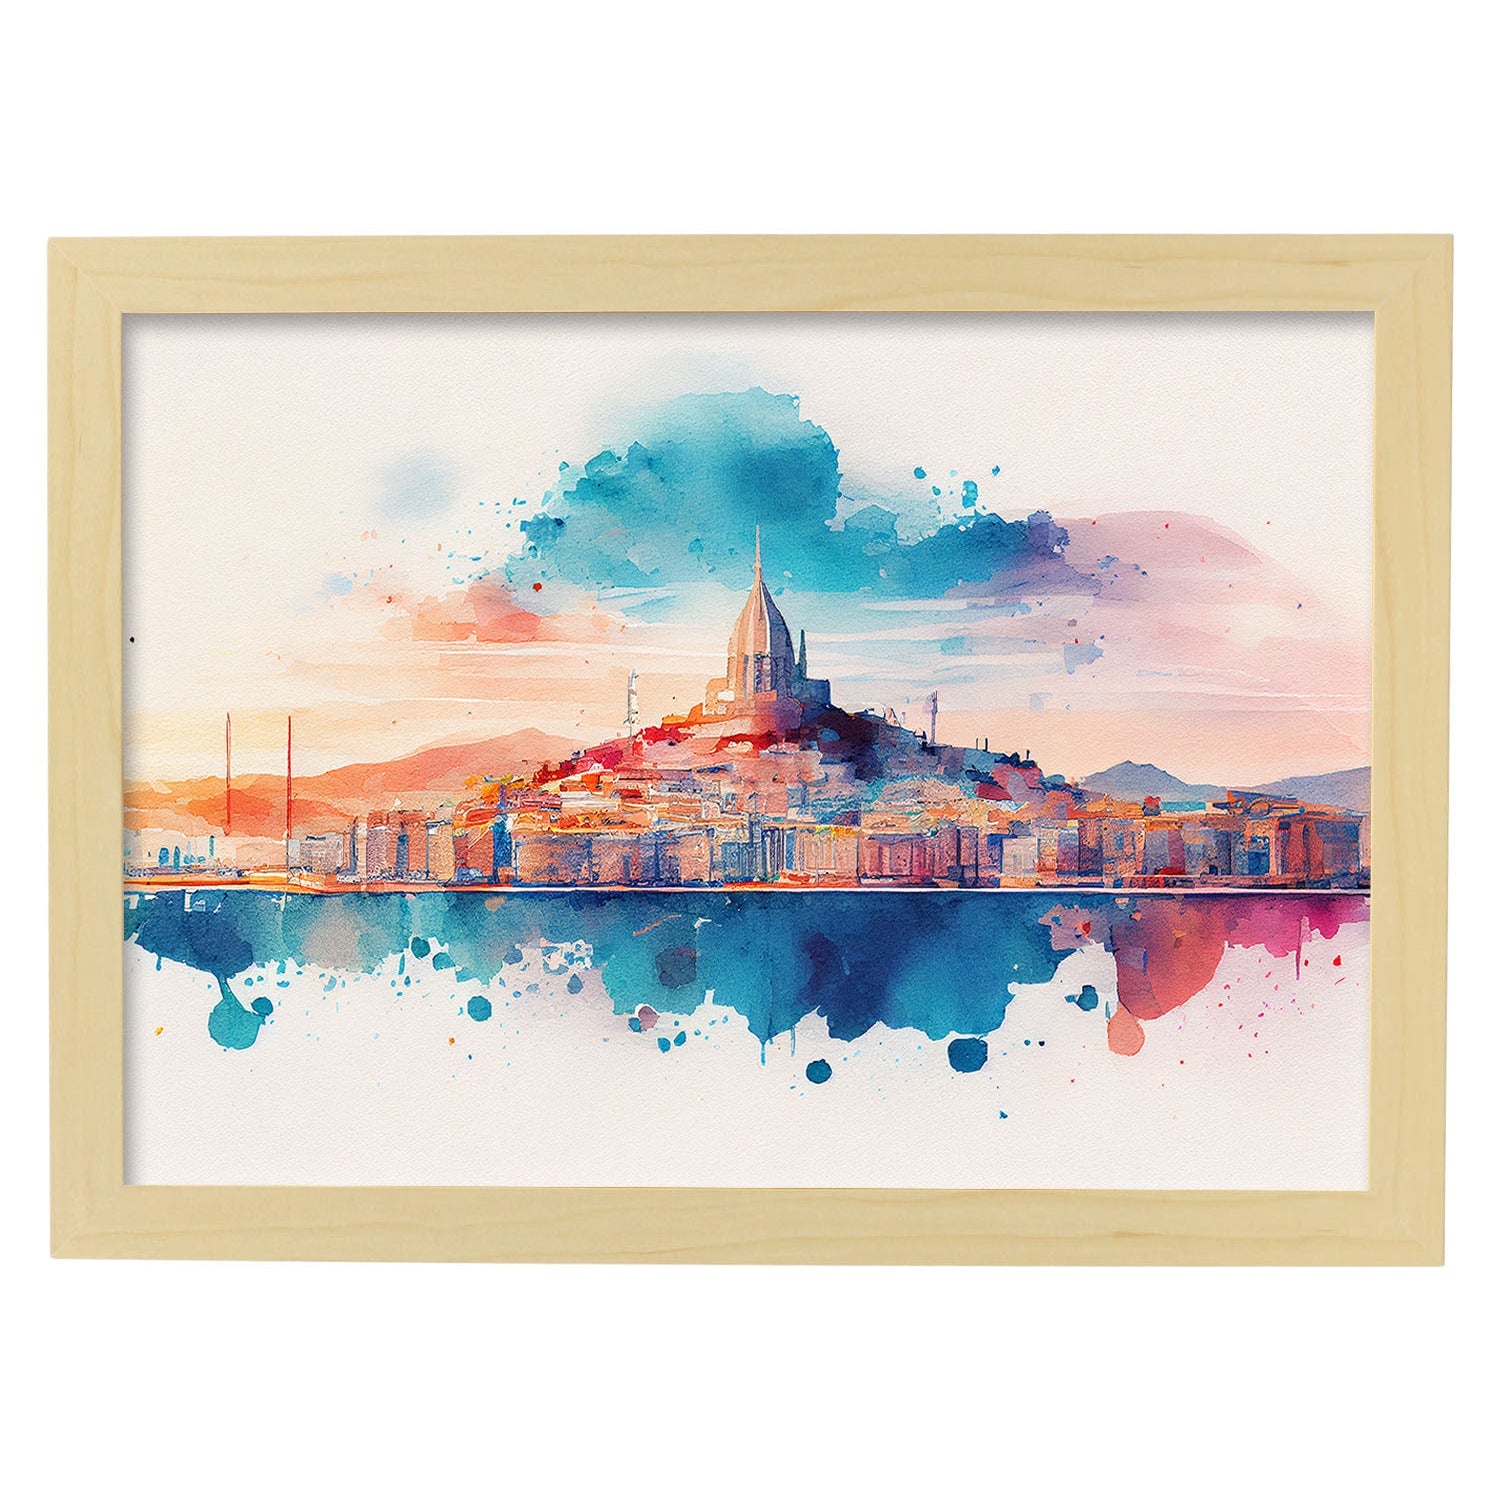 Nacnic watercolor of a skyline of the city of Marseille. Aesthetic Wall Art Prints for Bedroom or Living Room Design.-Artwork-Nacnic-A4-Marco Madera Clara-Nacnic Estudio SL